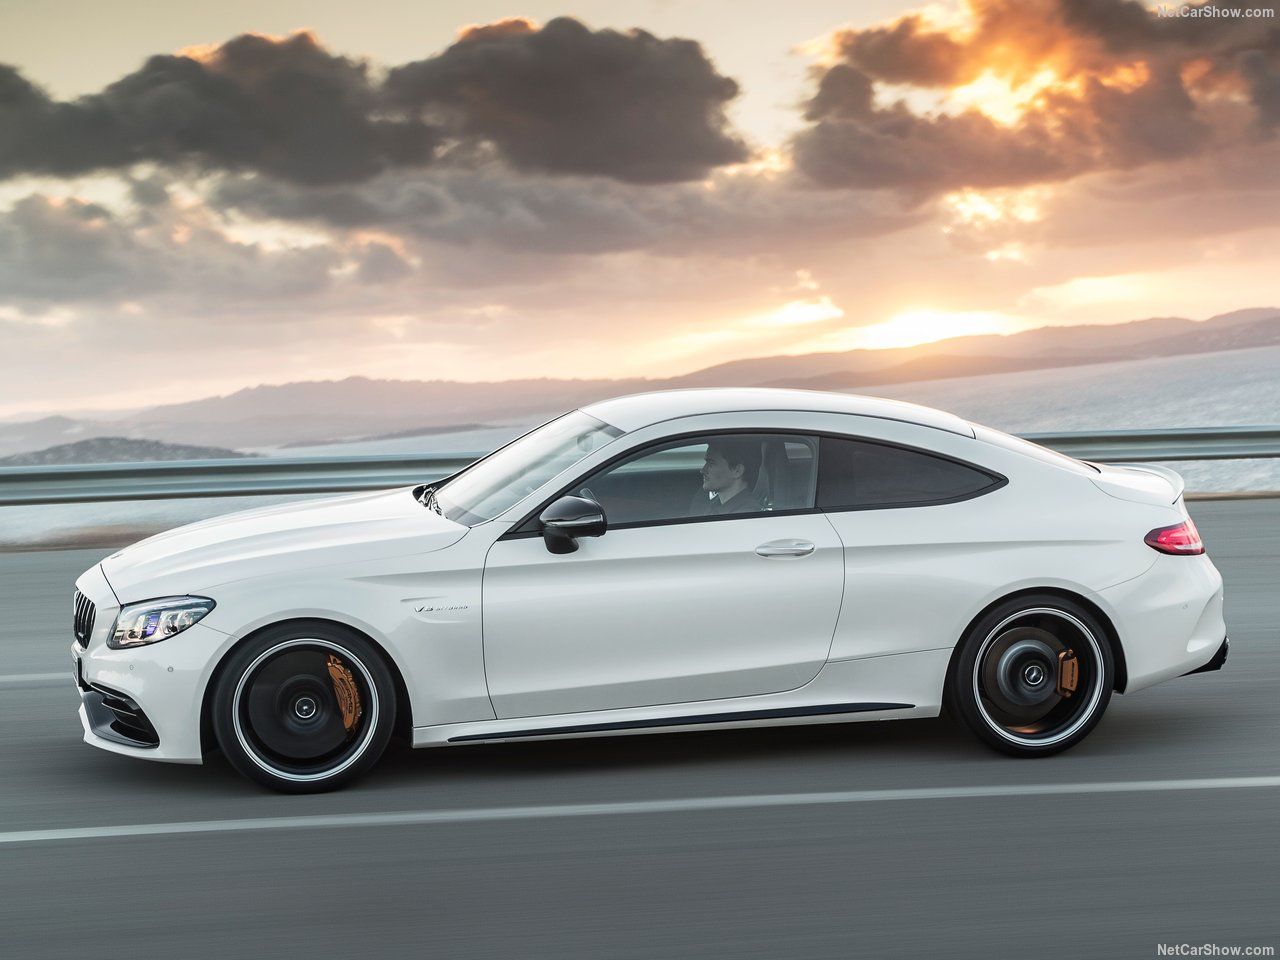 Mercedes-Benz-C63_S_AMG_Coupe-2019-1280-27